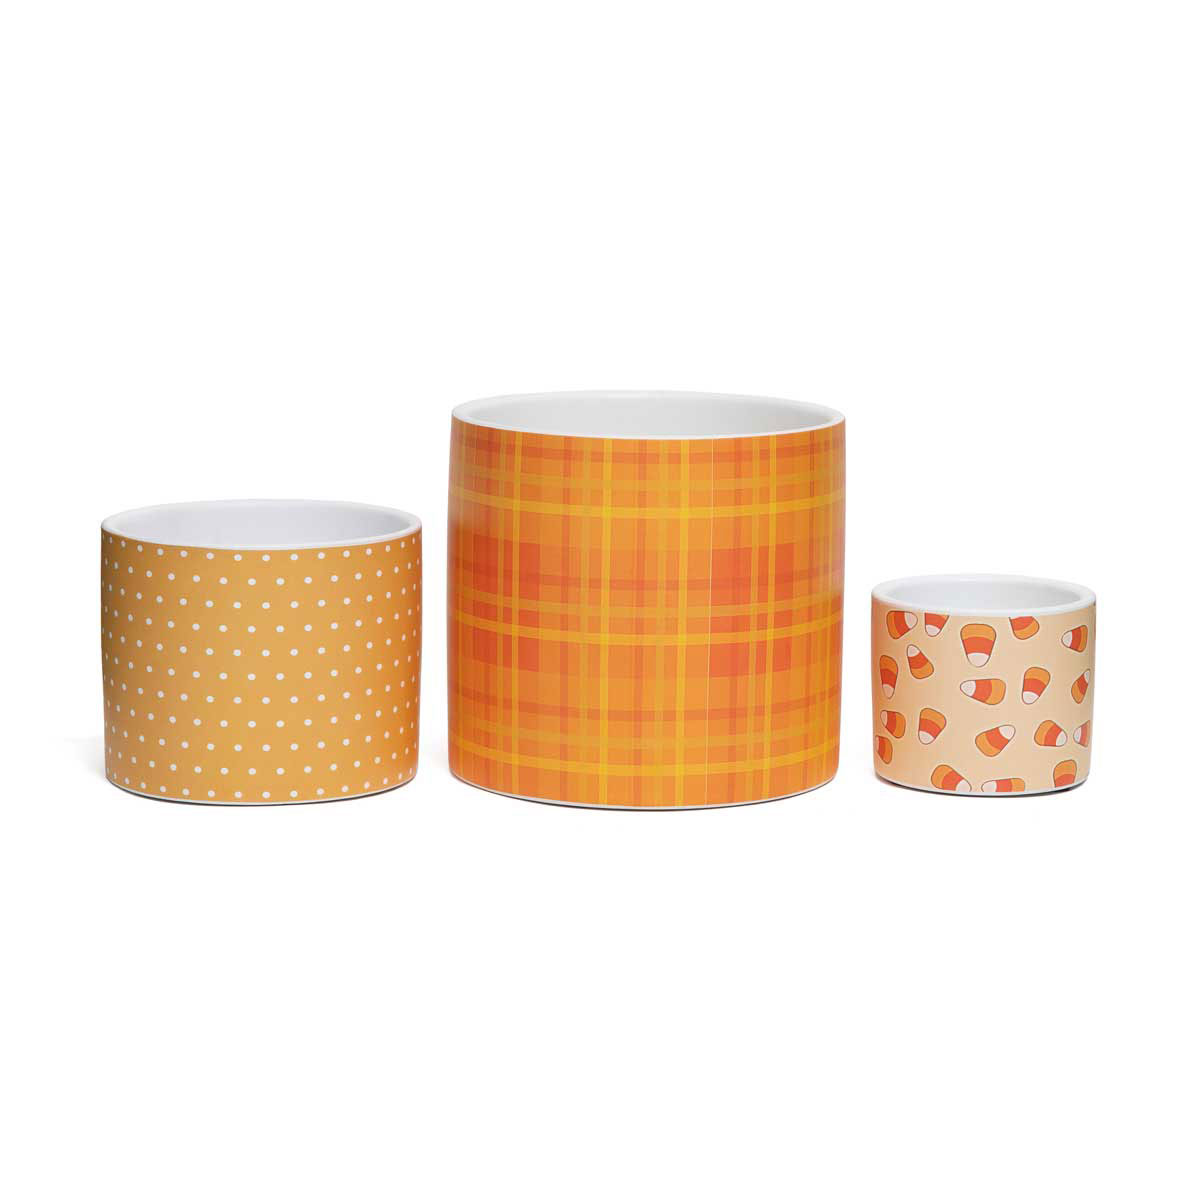 POT FALL PLAID LARGE 5.25IN X 4.75IN MUSTARD CERAMIC - Click Image to Close